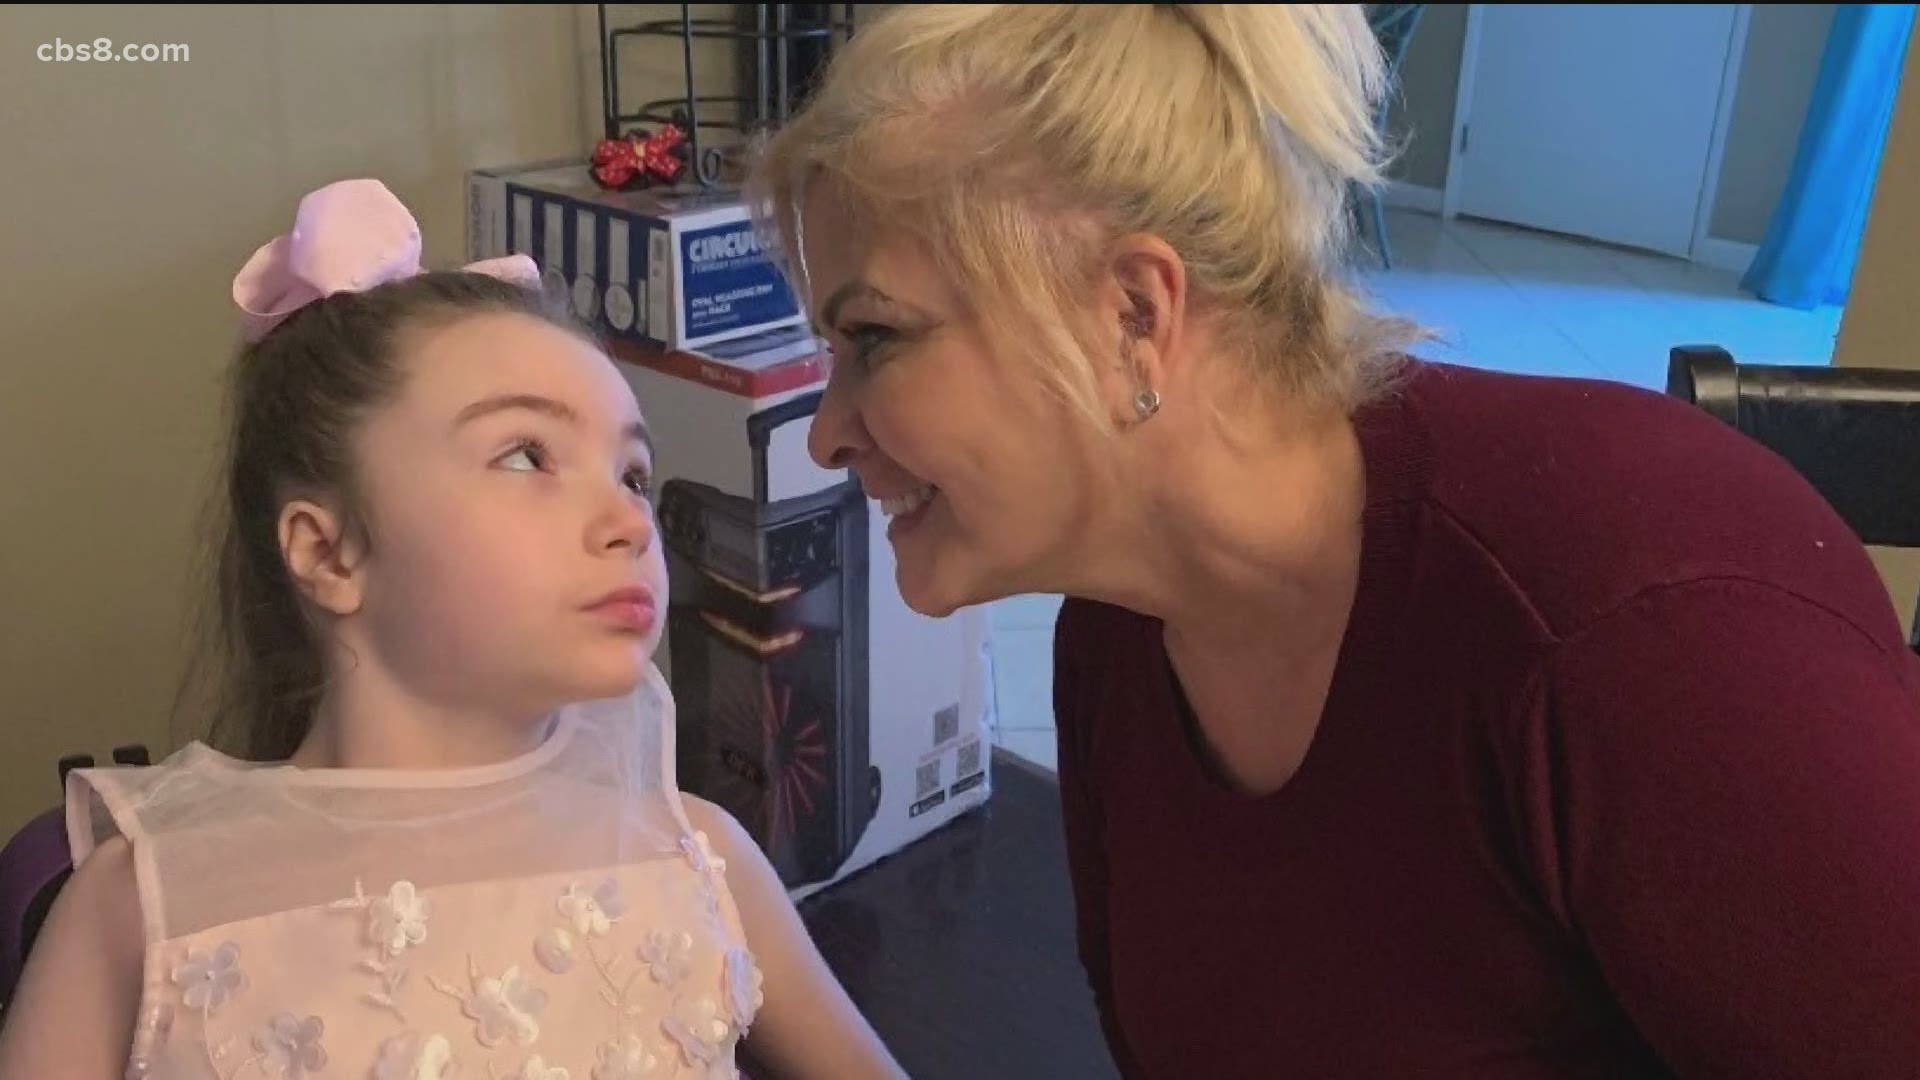 Isabella is non-verbal due to a rare neurological disorder, but she has a beautiful way of connecting with people with her eyes and expressions.